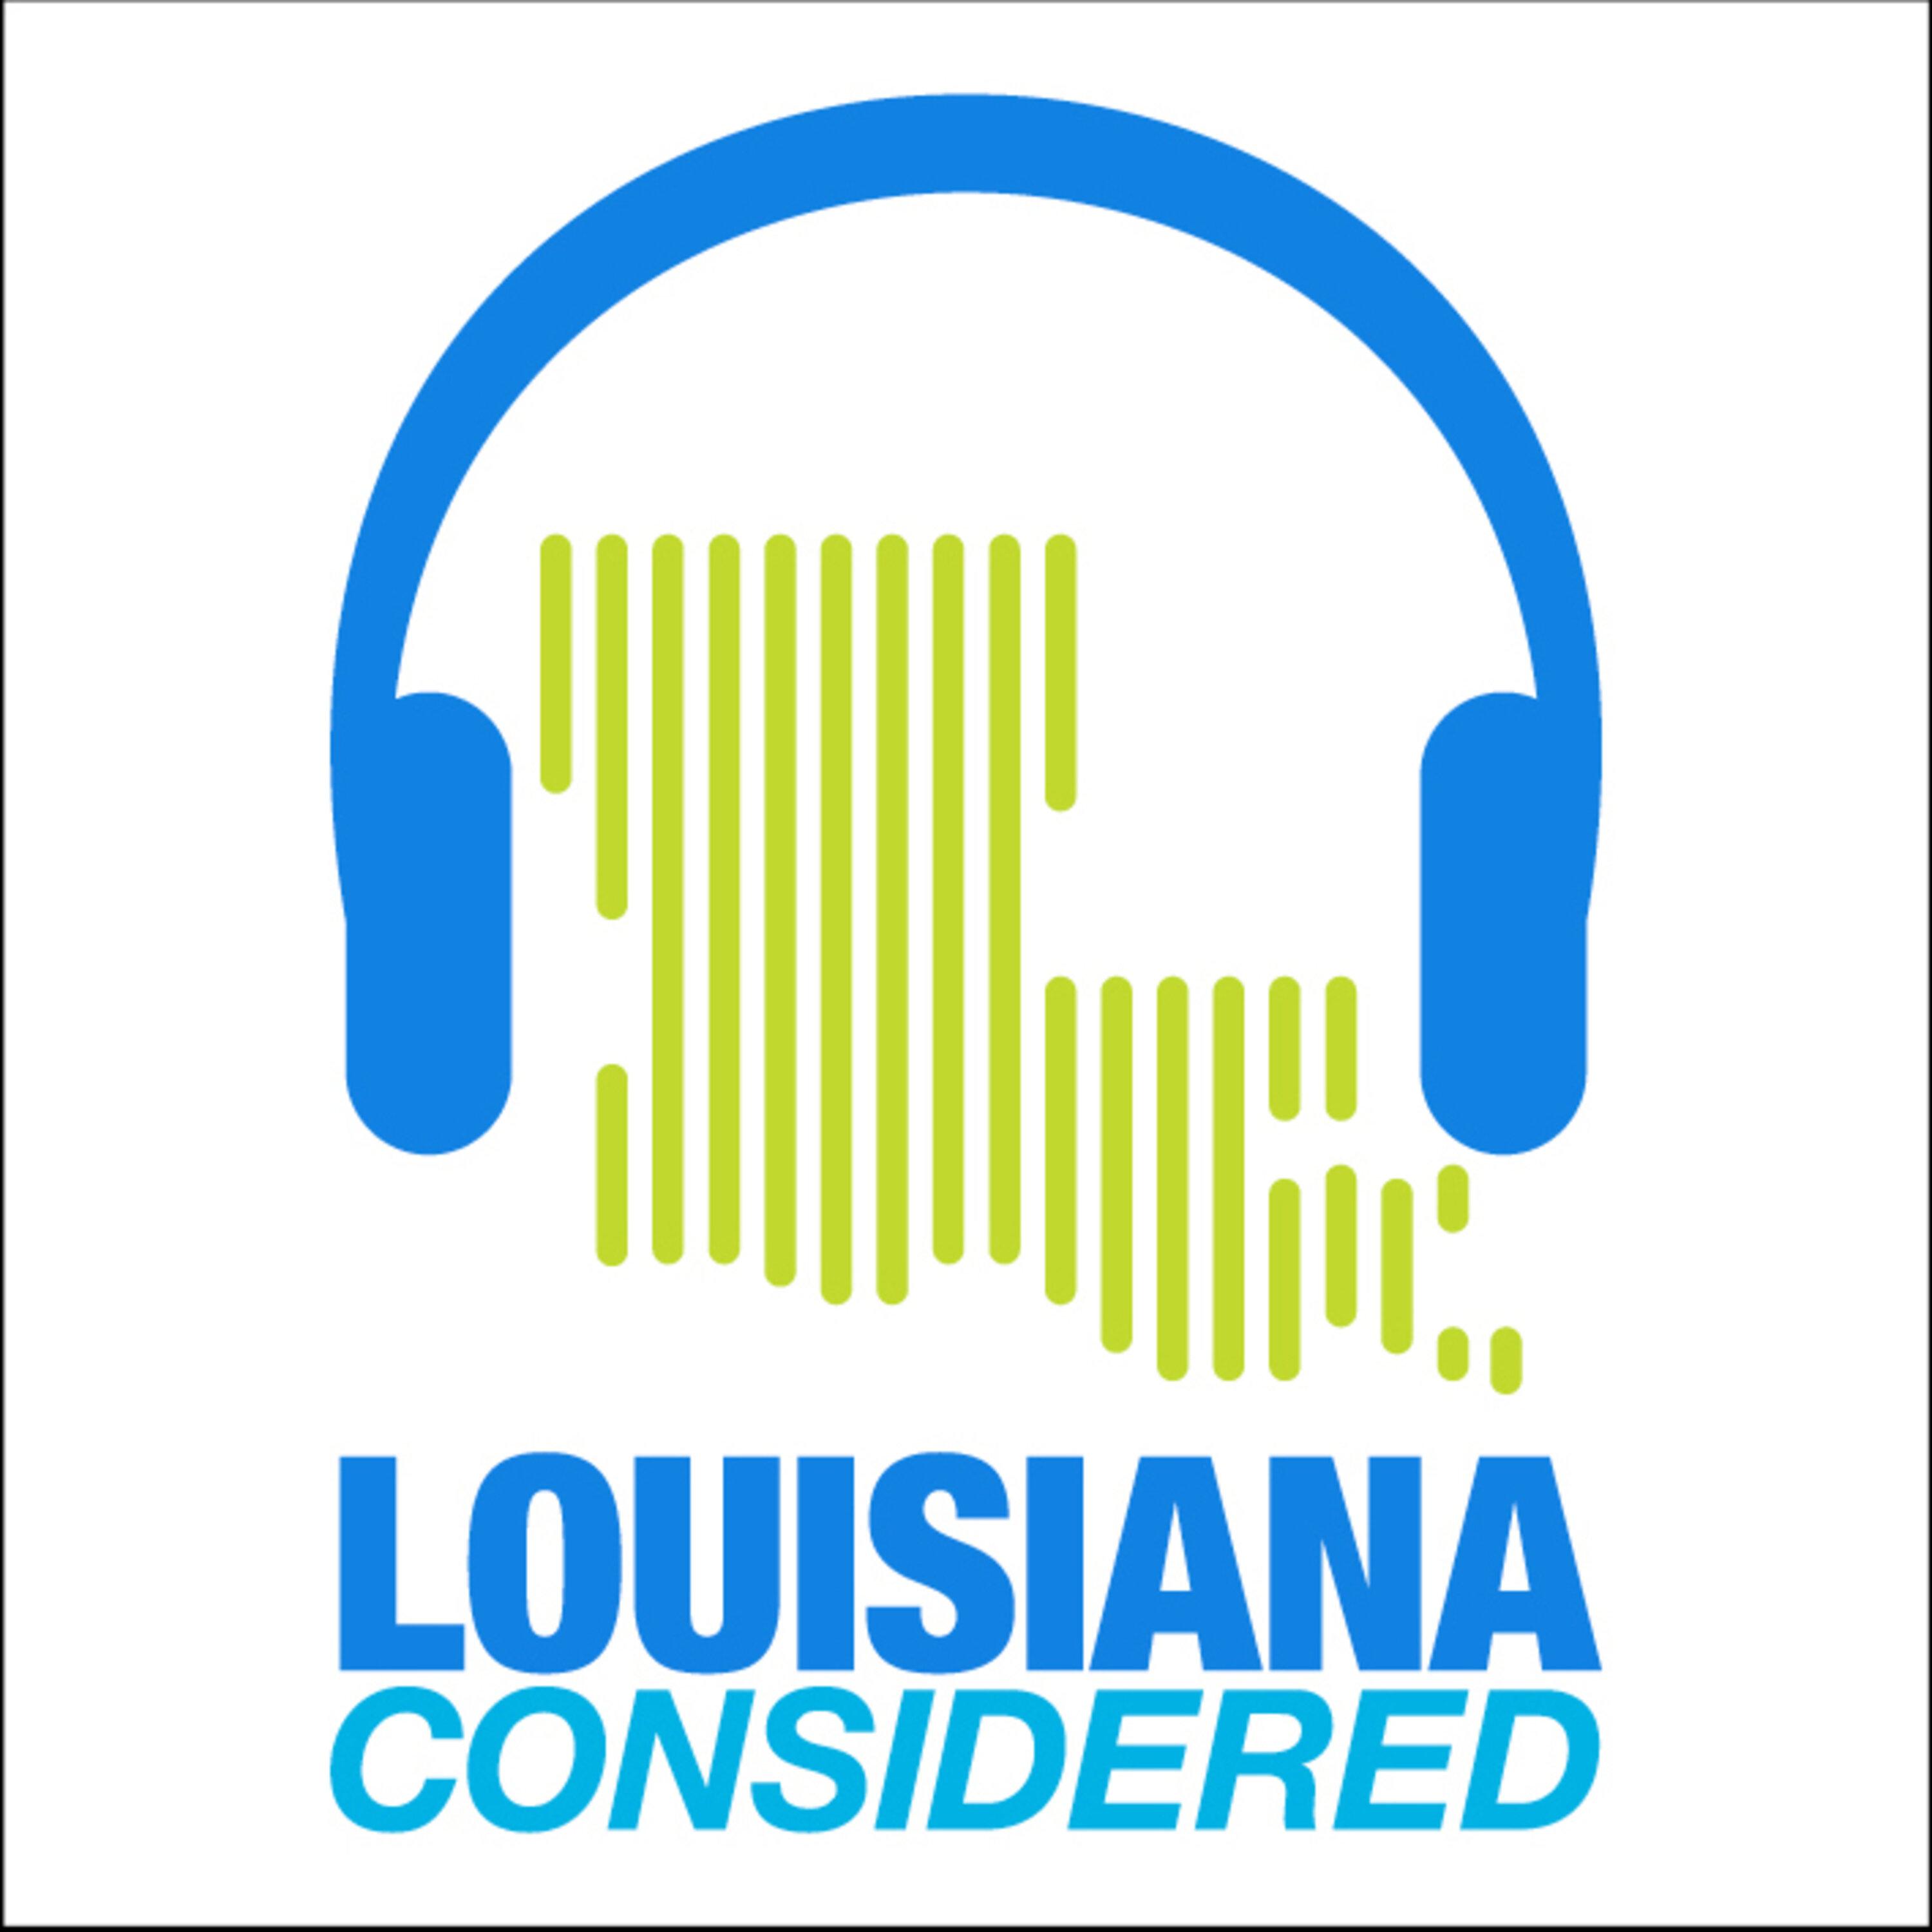 Thumbnail for "Louisiana Considered: Students with limited English fluency face barriers to graduation".